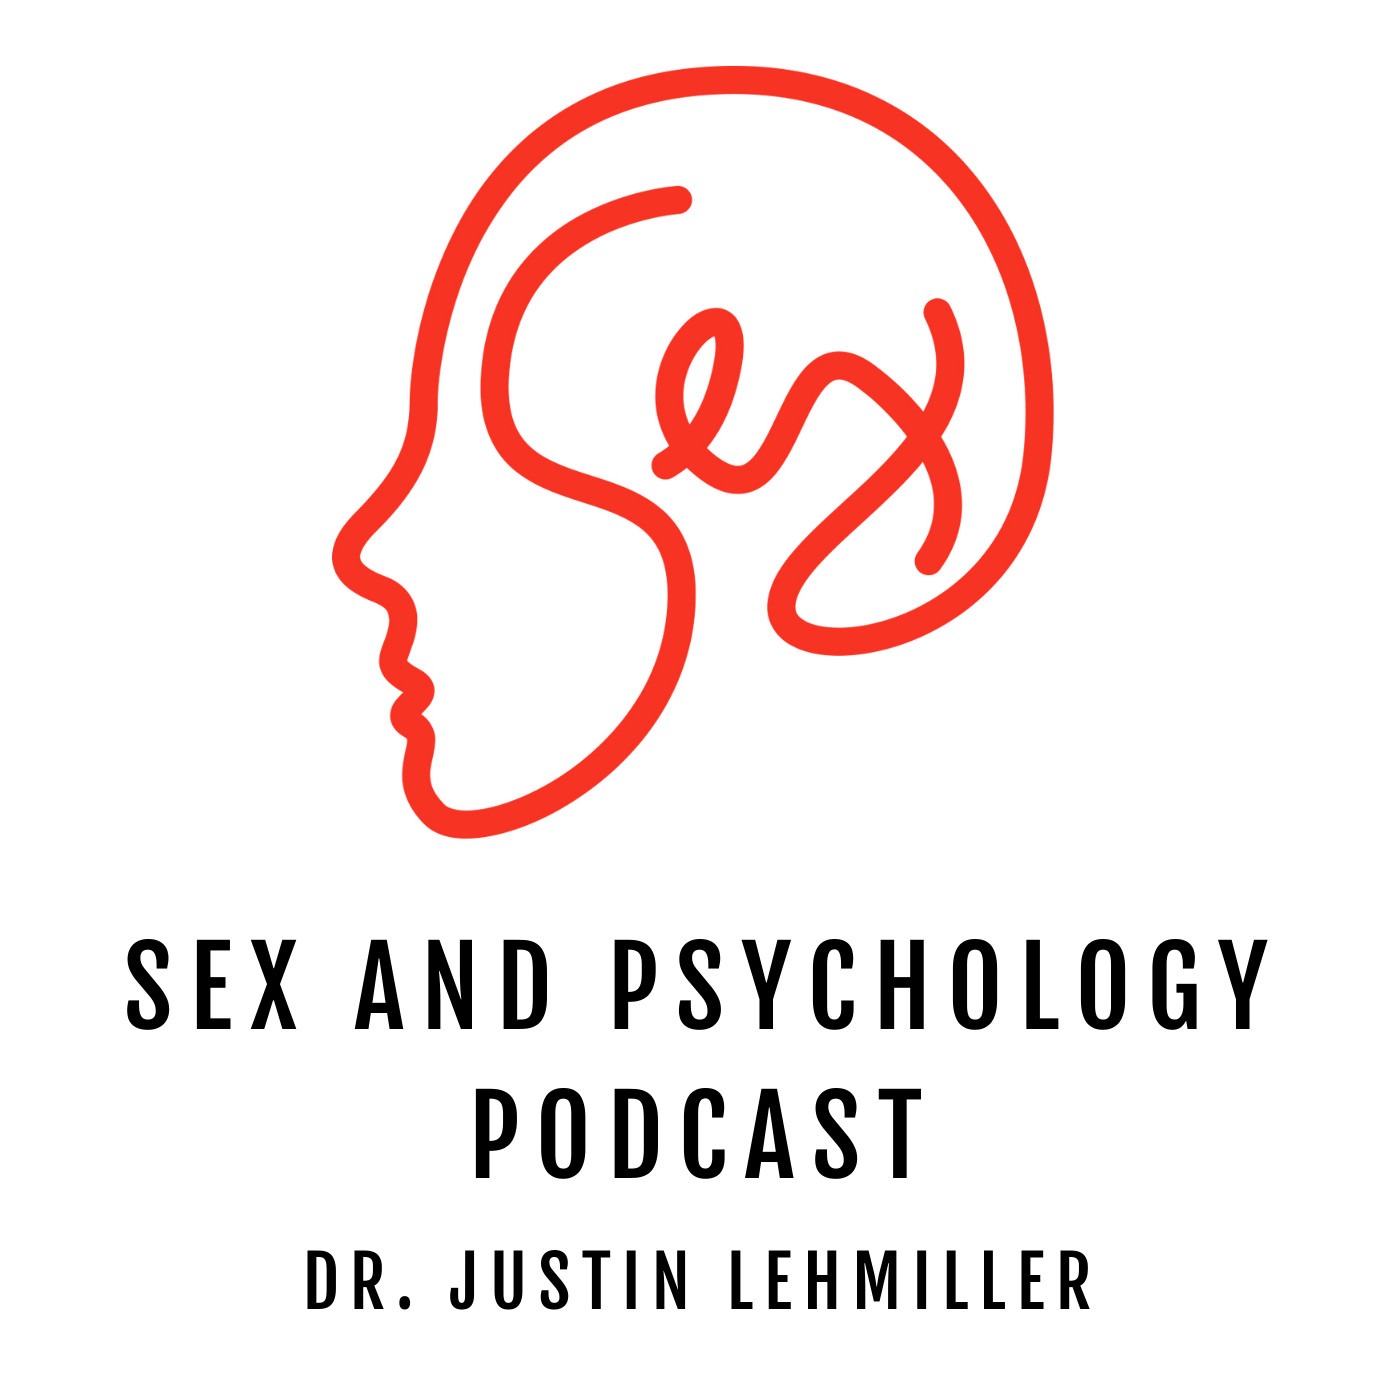 Sex and Psychology Podcast podcast show image